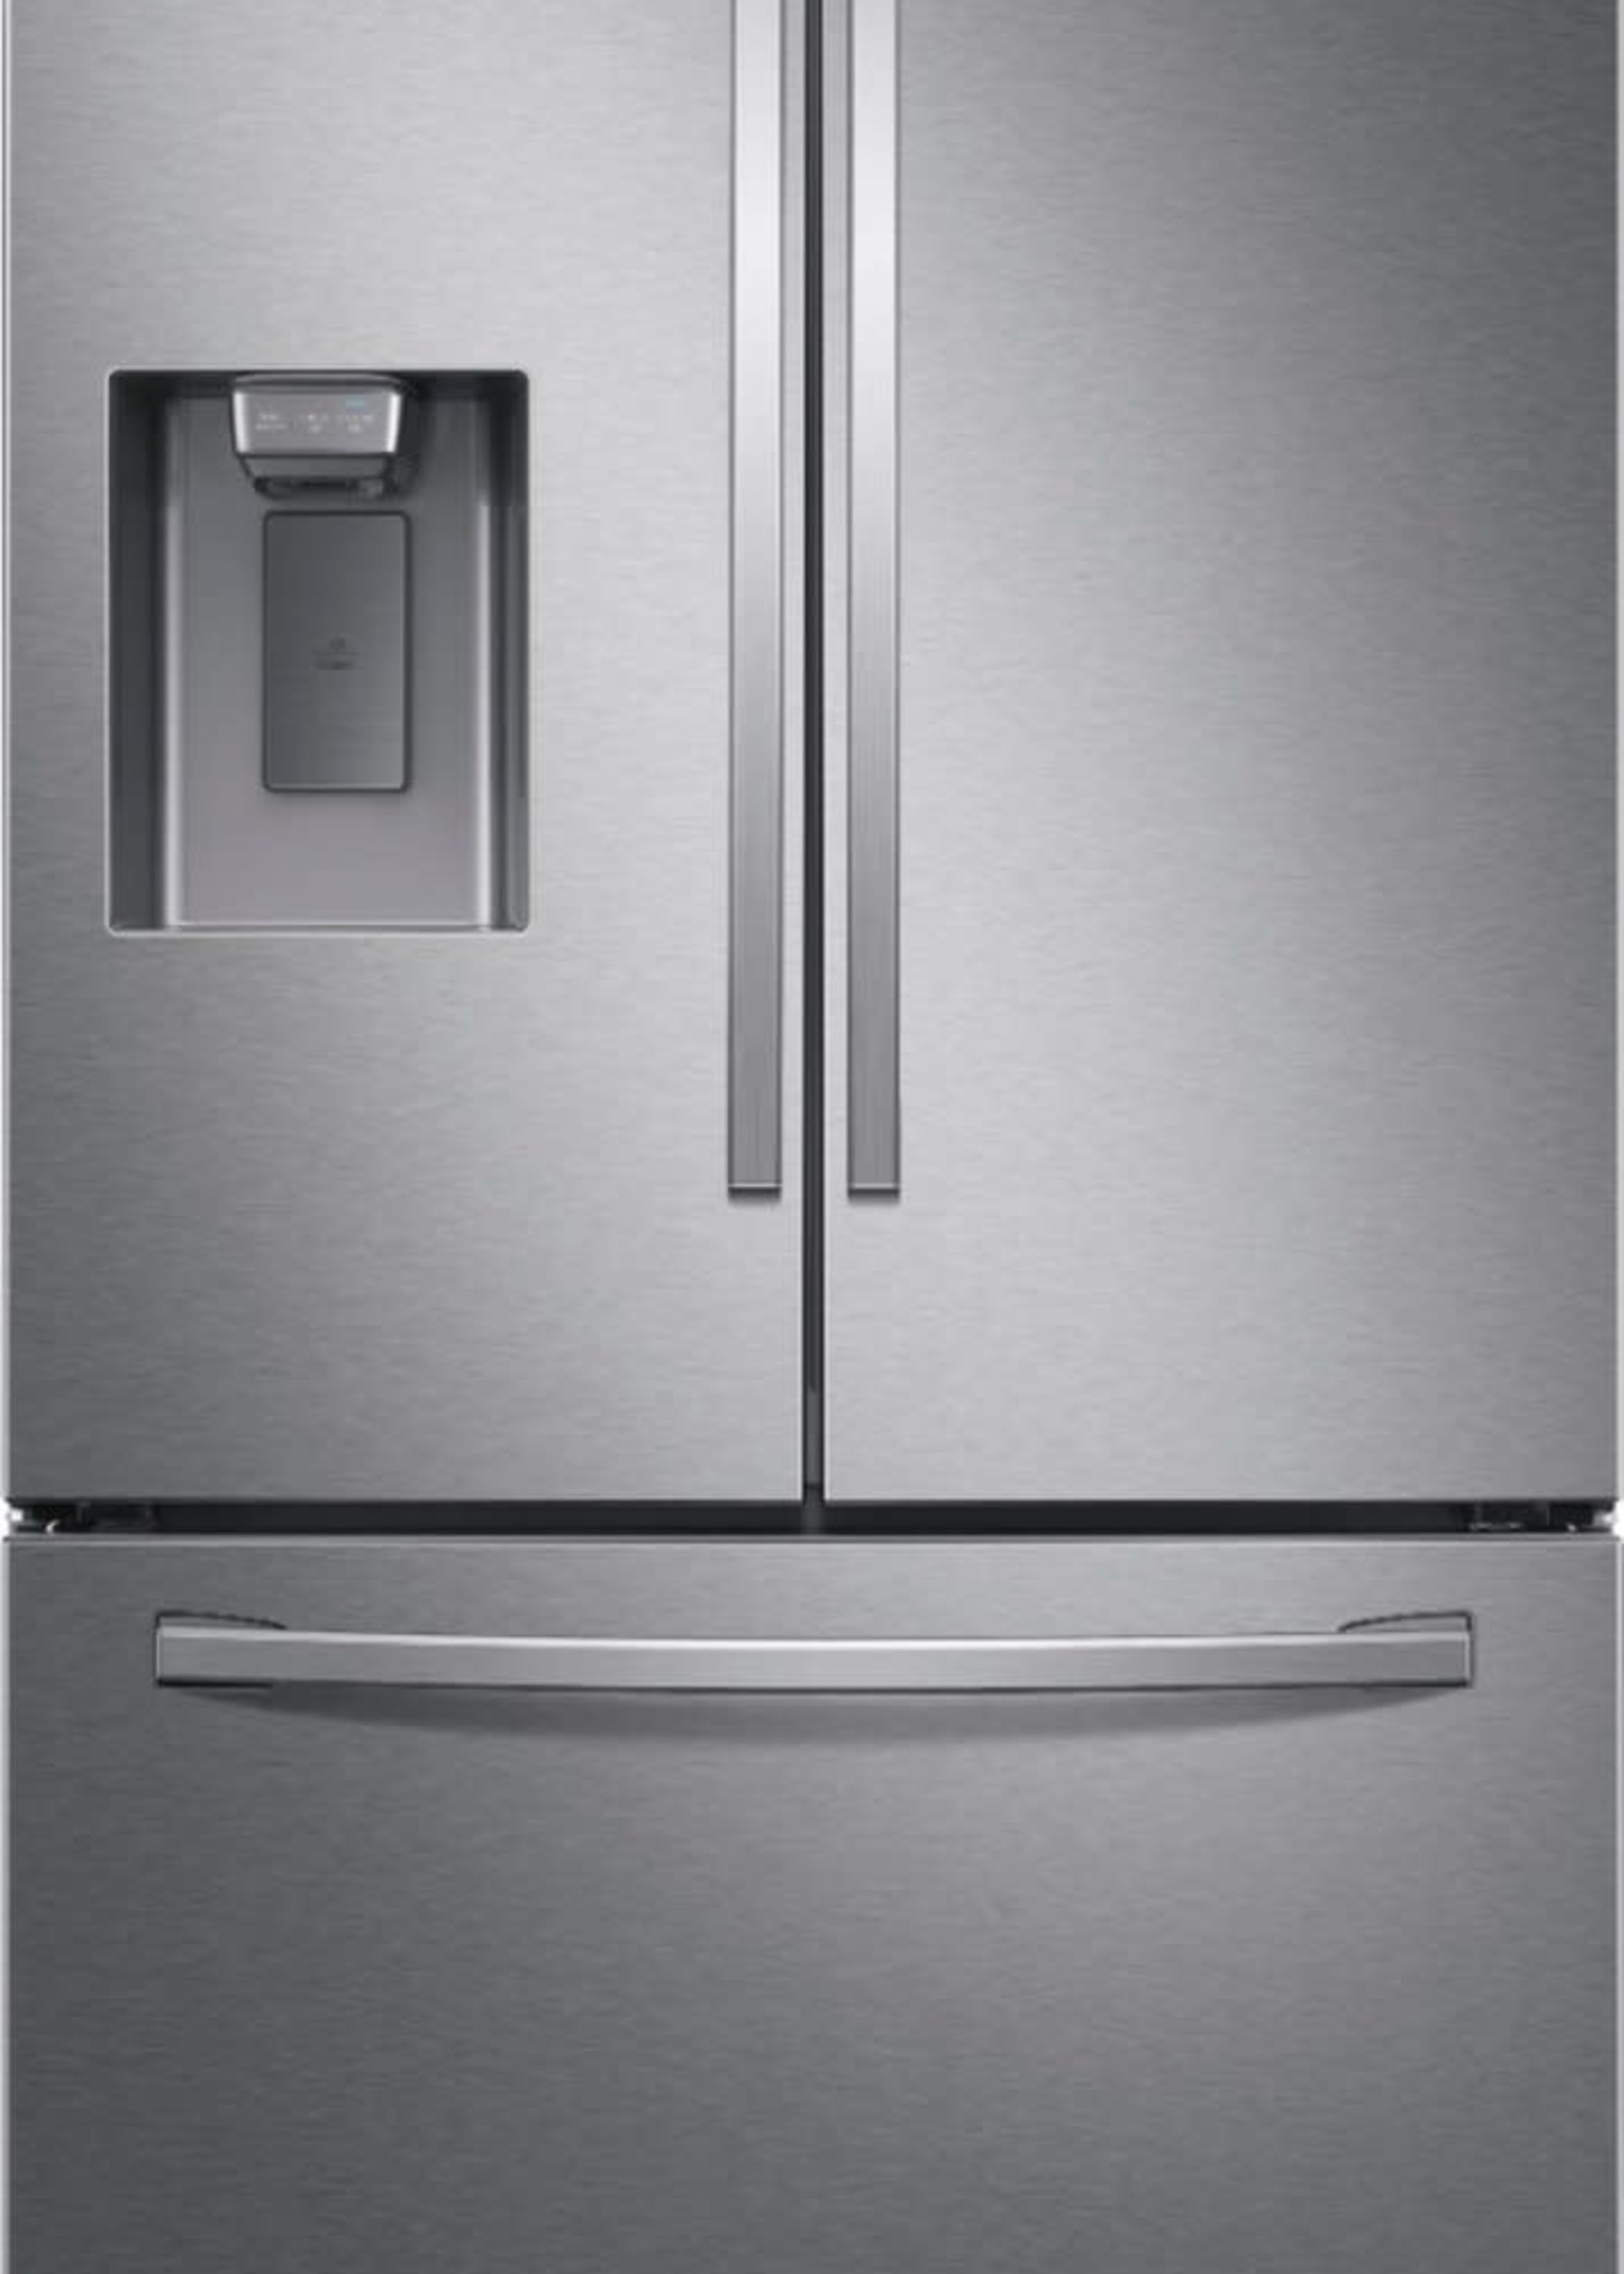 Samsung ***Damage Special Samsung RF27T5241SR  27-cu ft French Door Refrigerator with Dual Ice Maker (Fingerprint Resistant Stainless Steel) ENERGY STAR